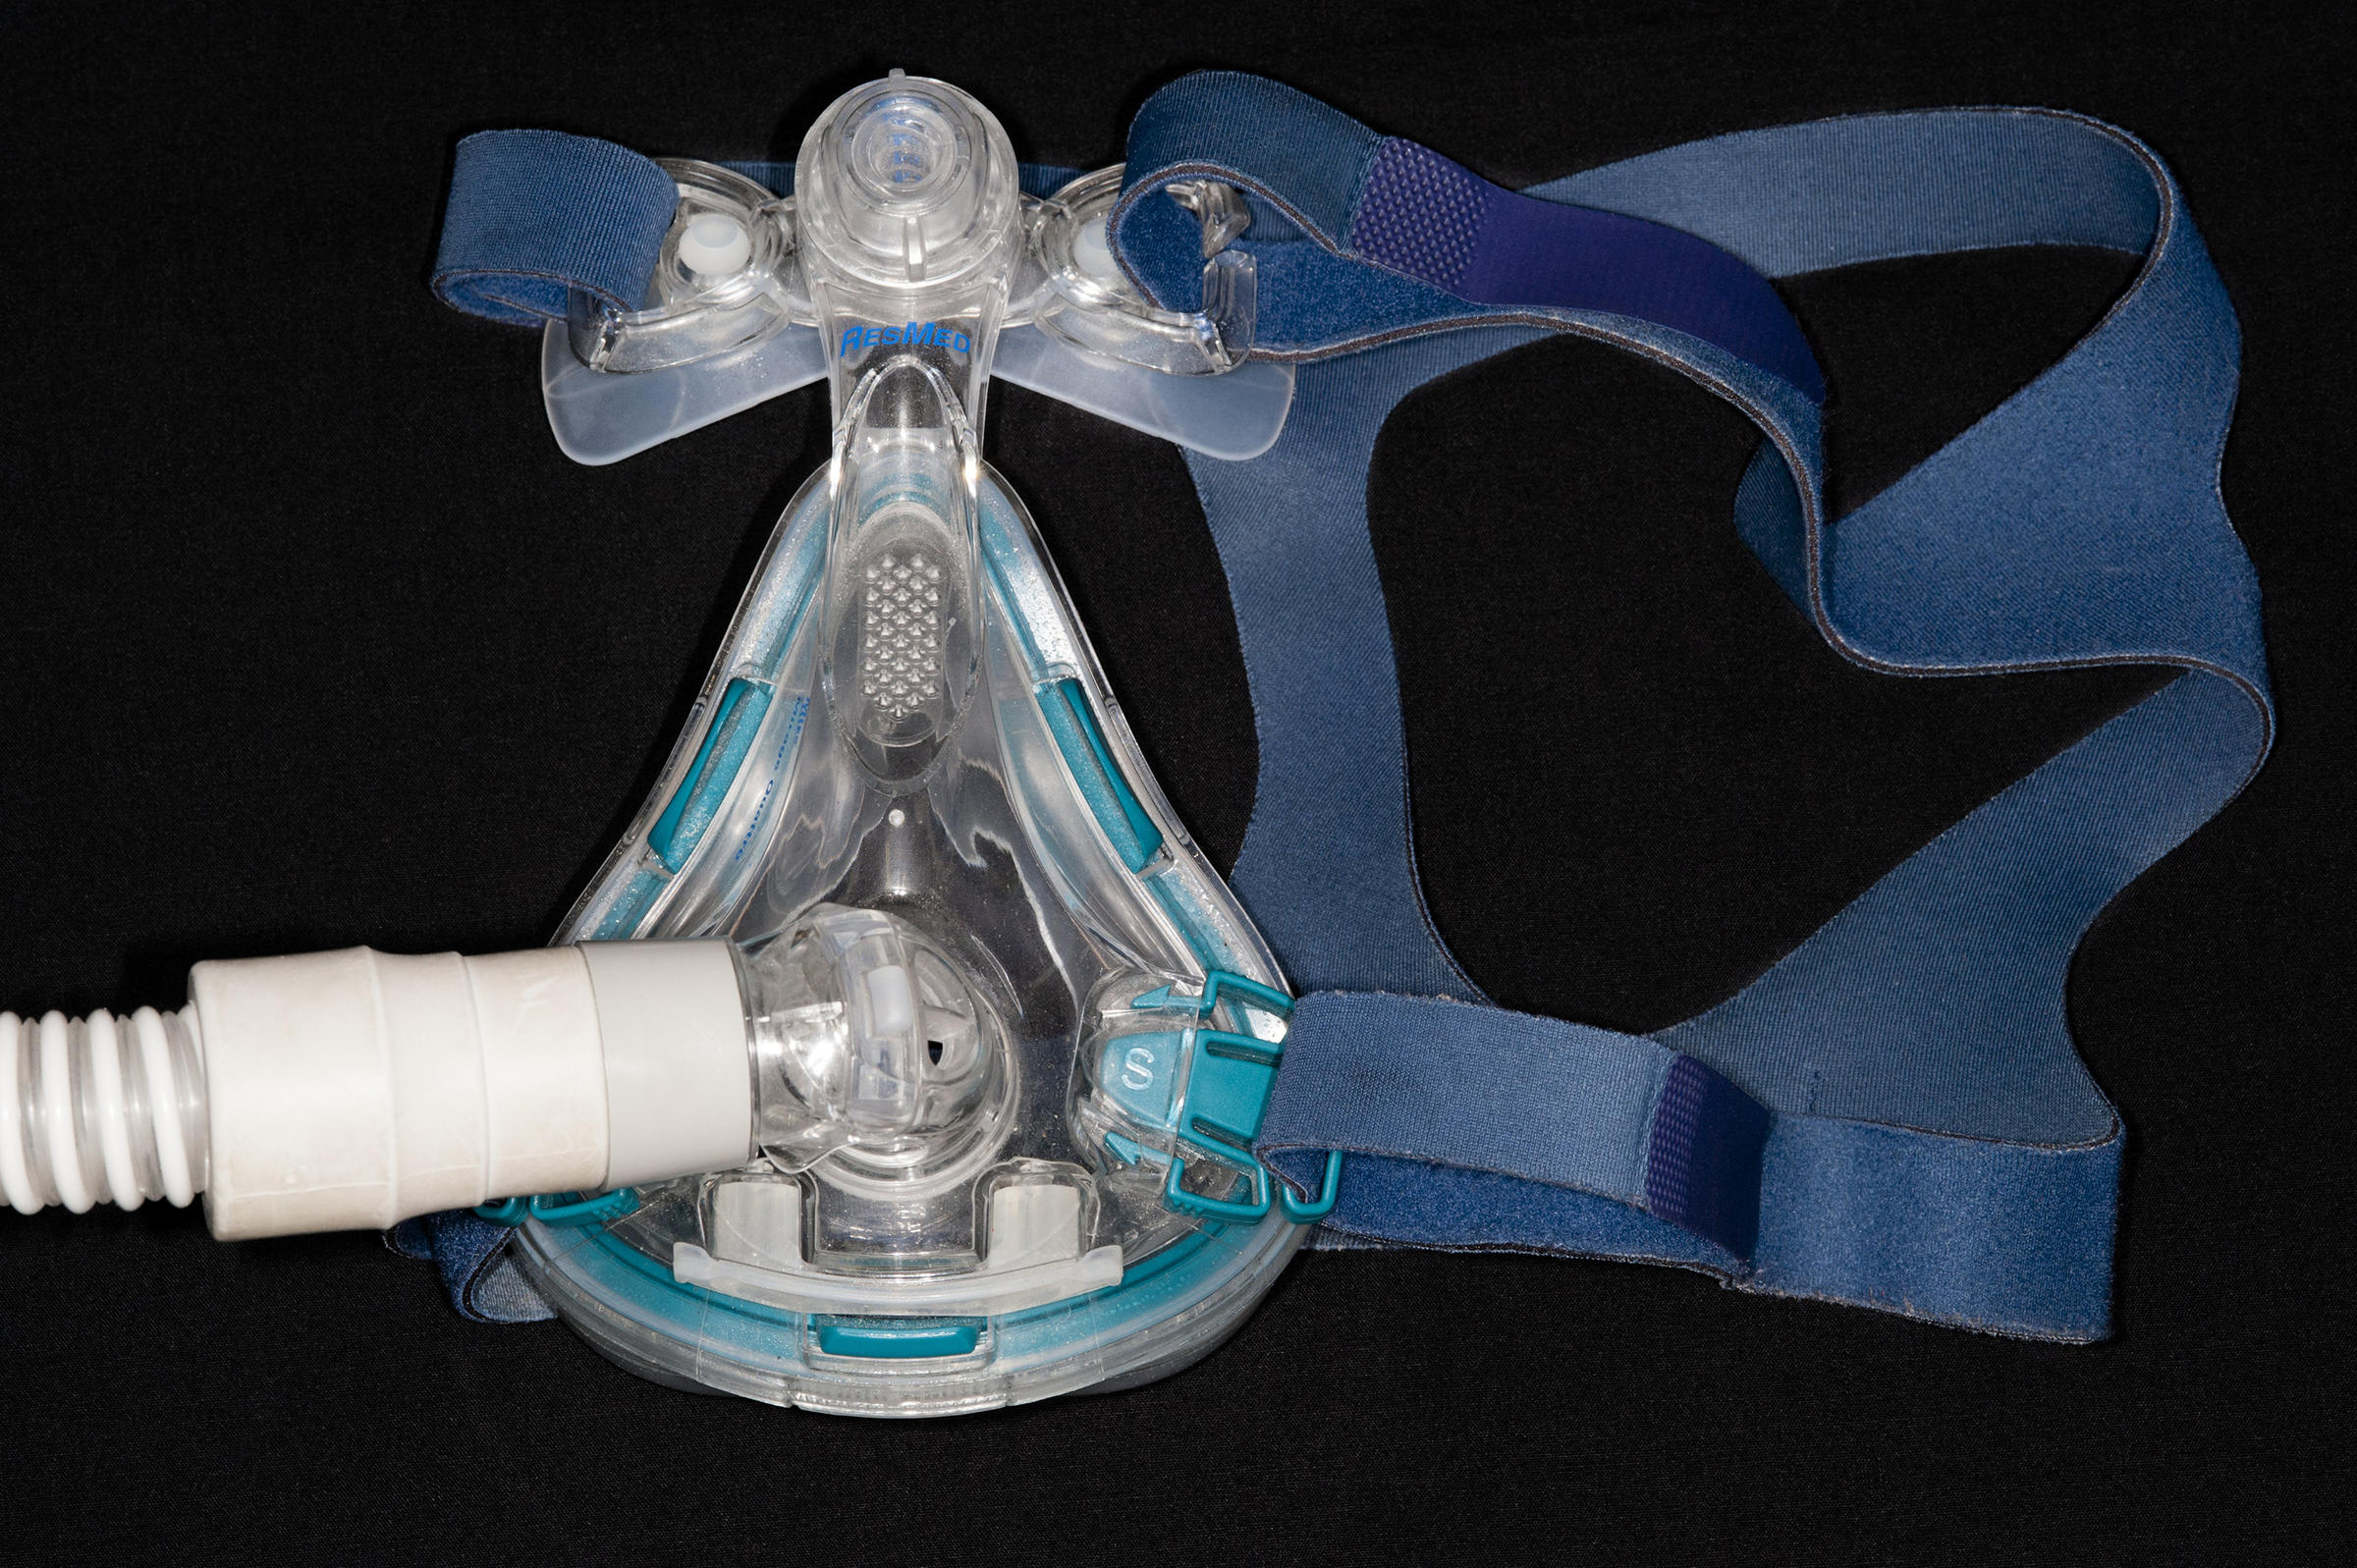 CPAP Machines Were Seen As Ventilator Alternatives, But Could Spread COVID-19